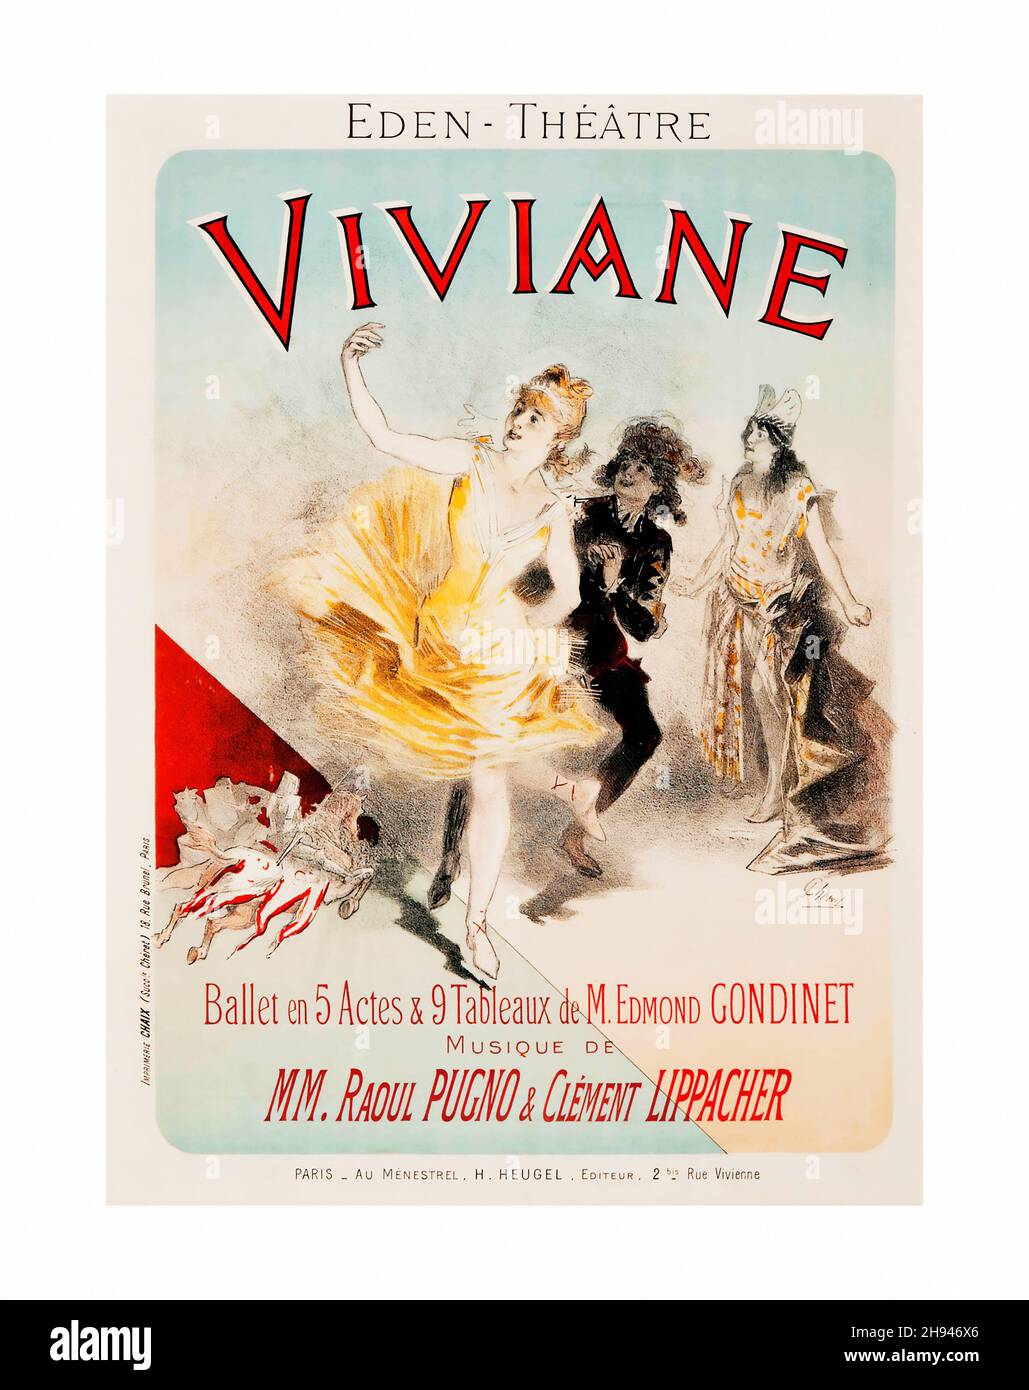 Belle epoque poster Cut Out Stock Images & Pictures - Alamy